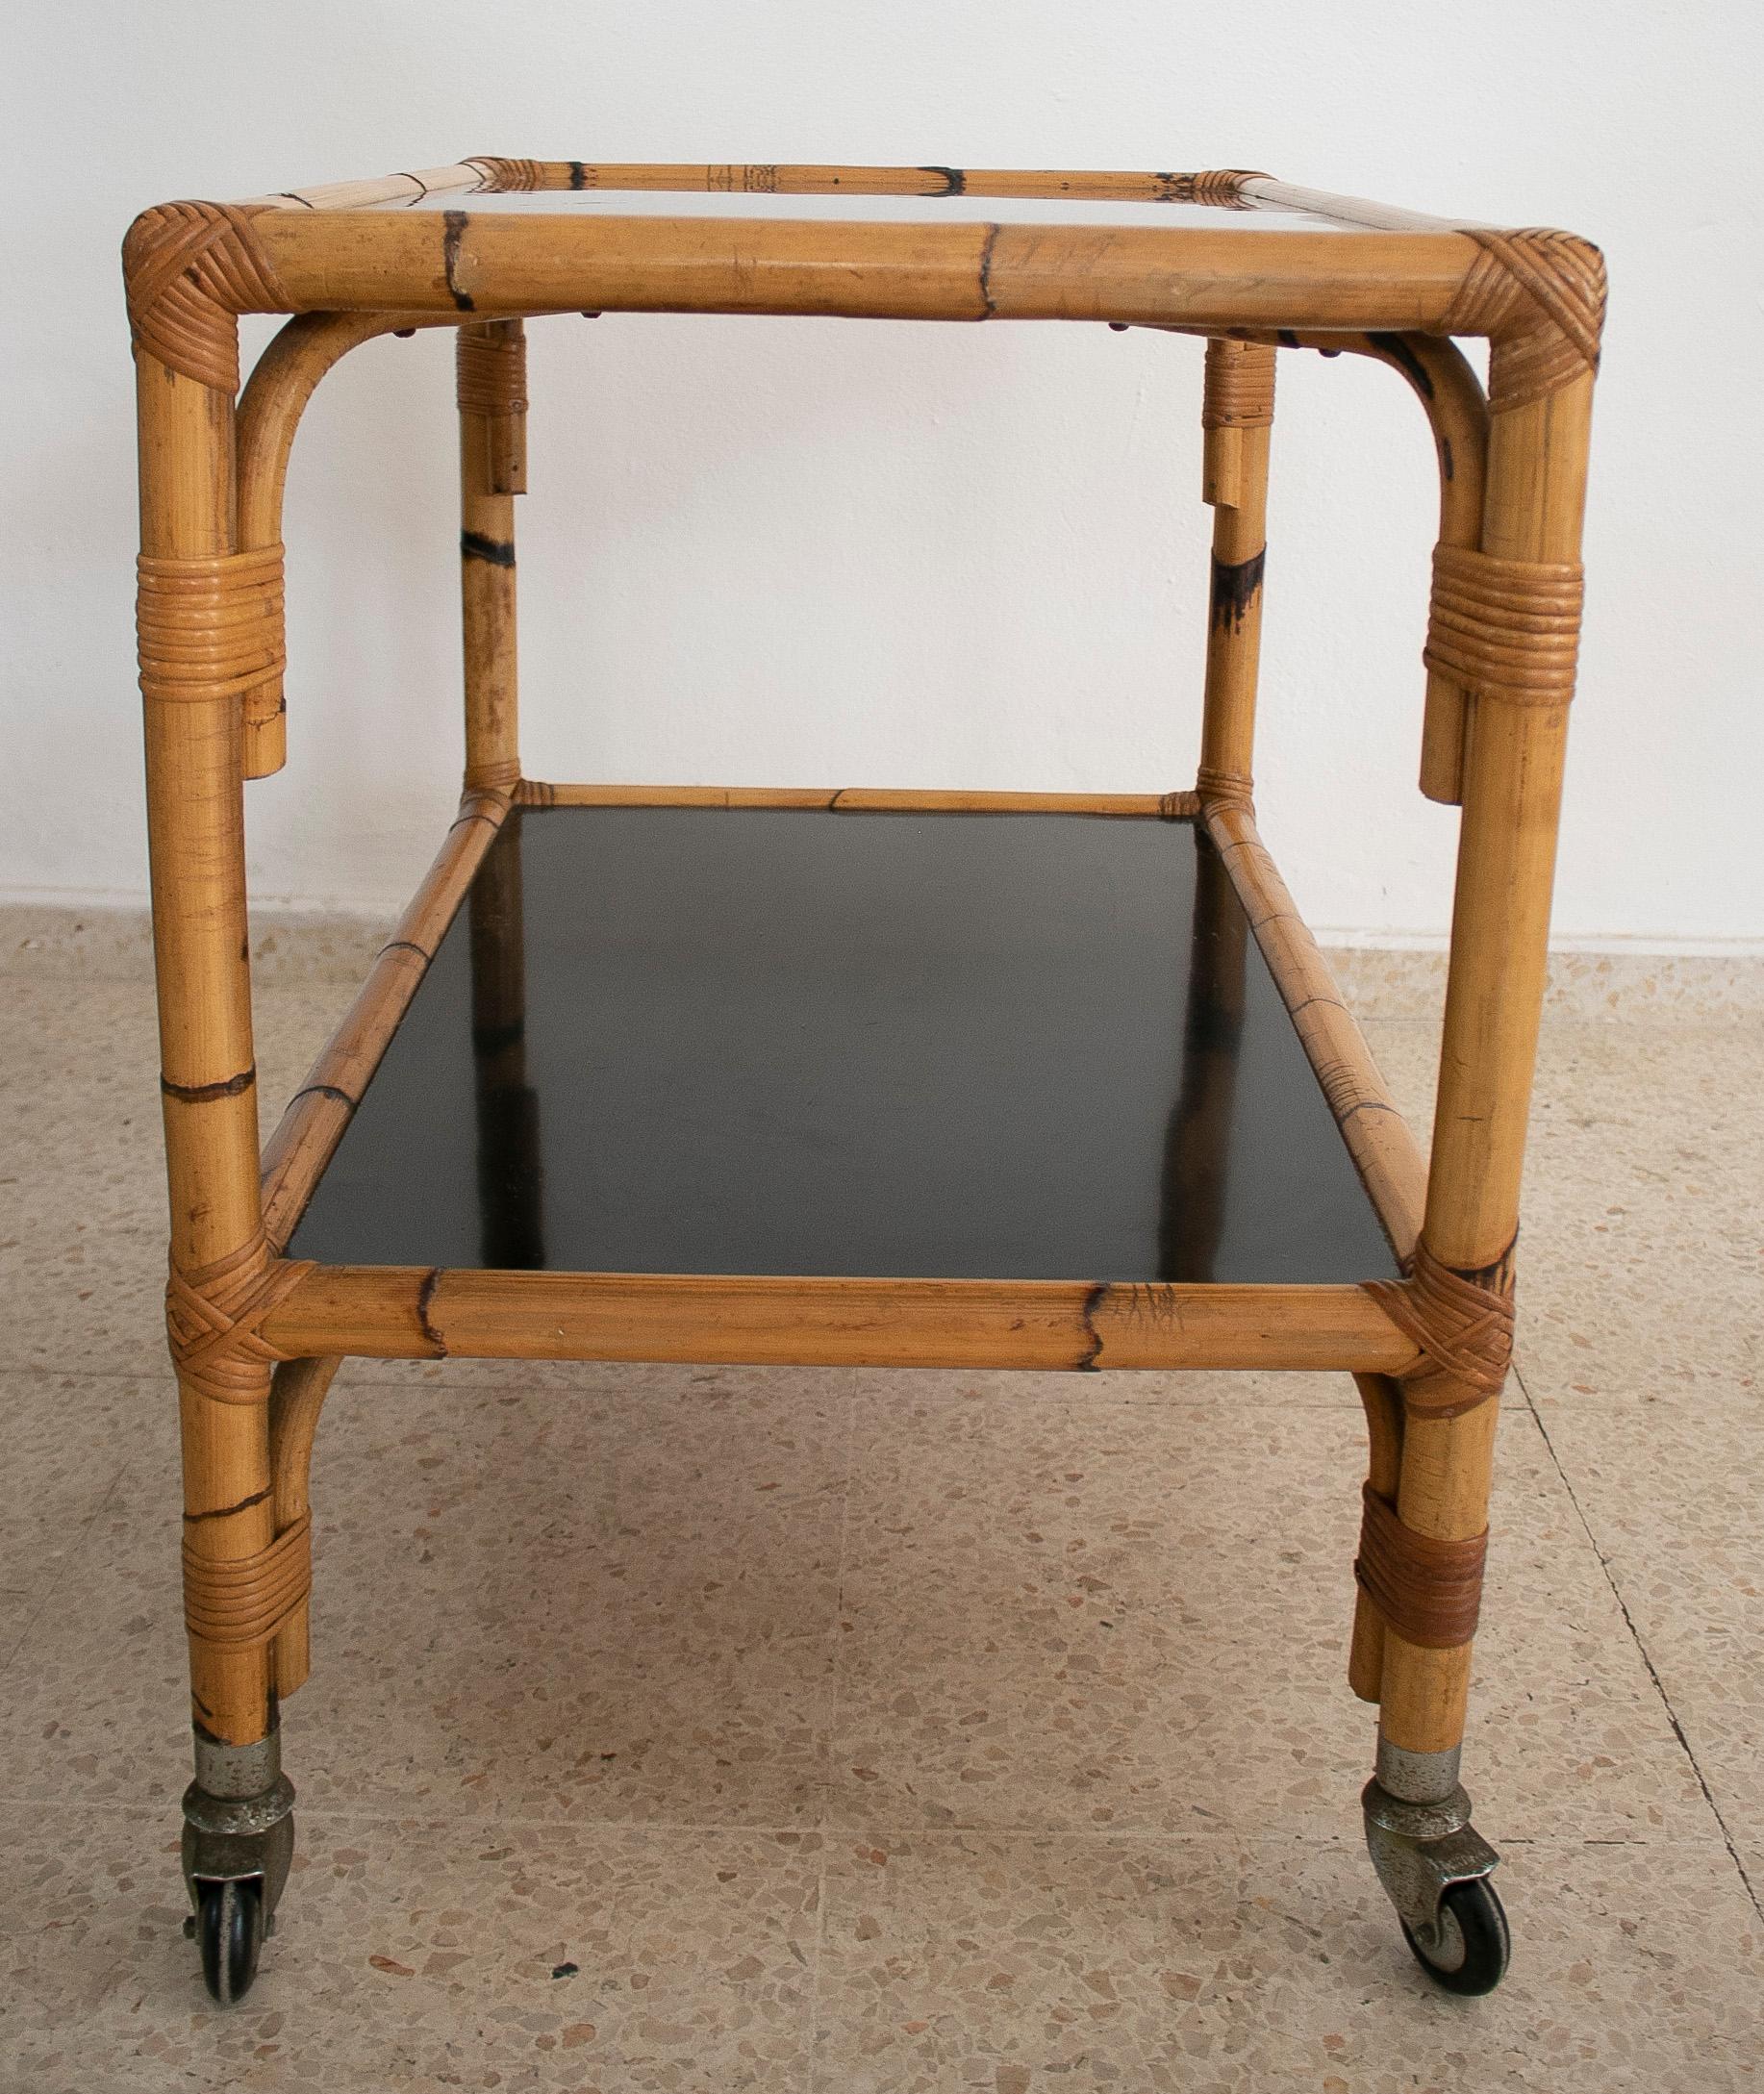 1970s Spanish Bamboo 2-Shelves Trolley w/ Smoked Glass Panels For Sale 3